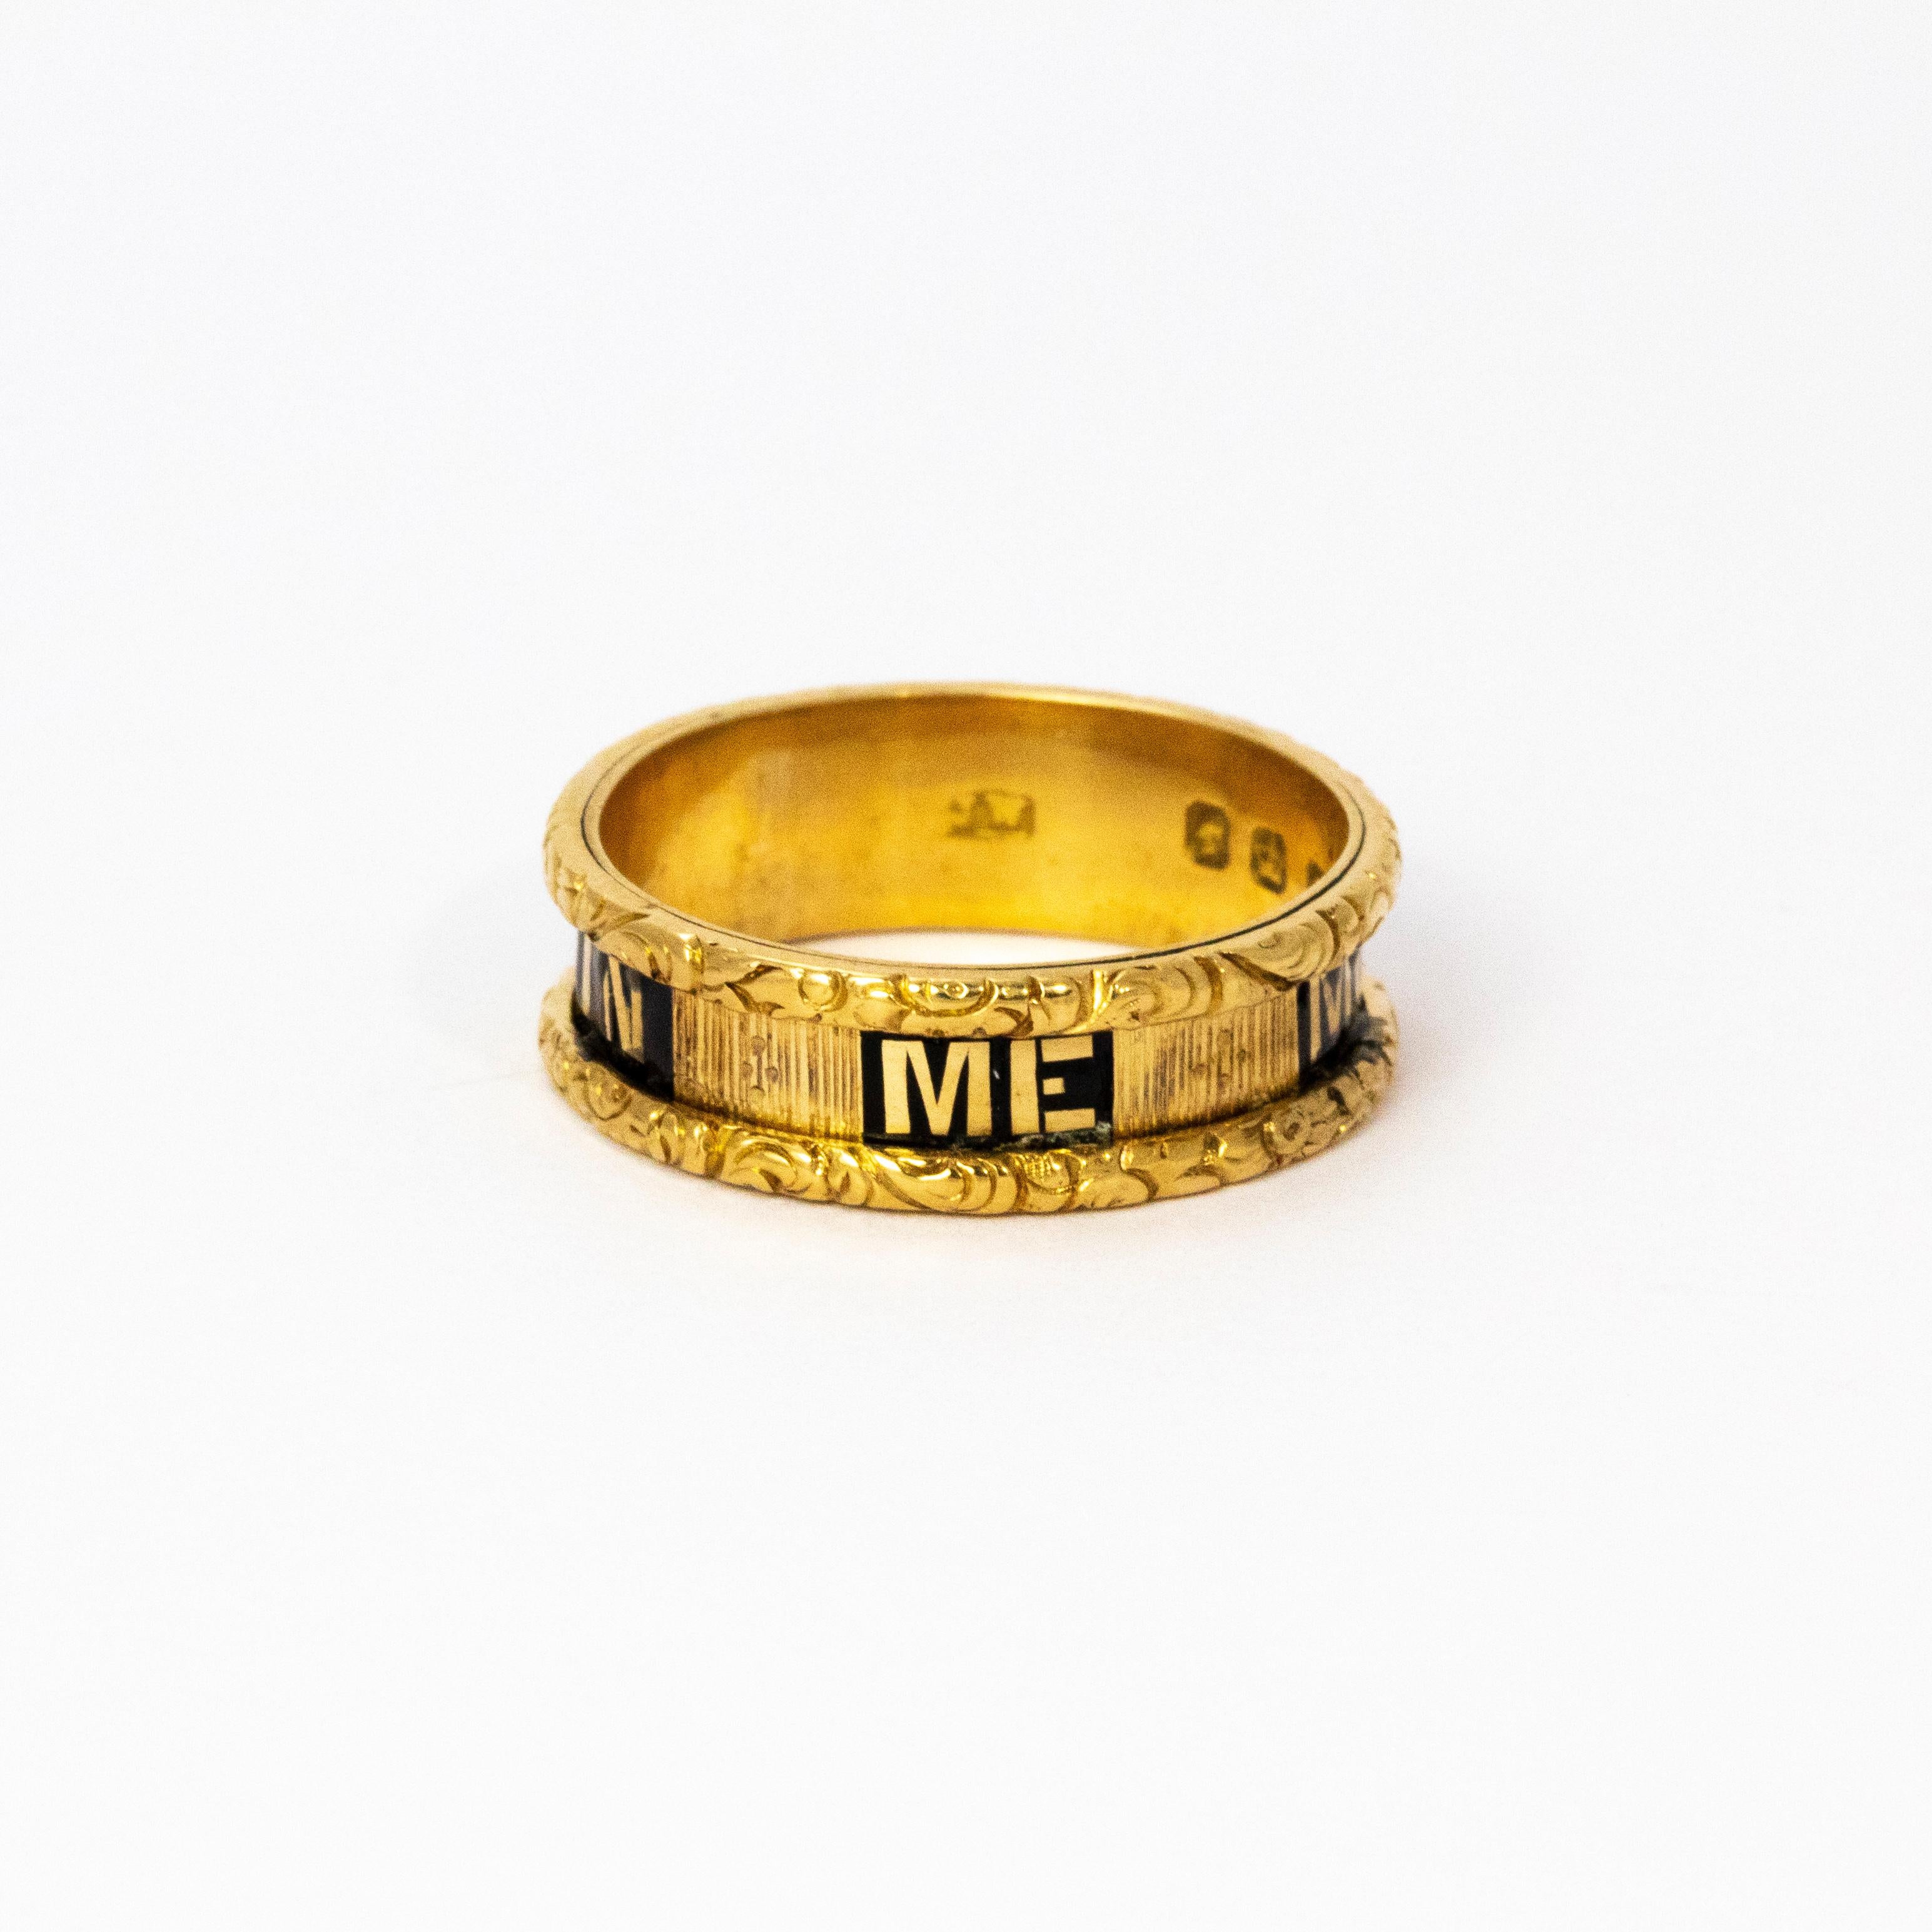 A very fine Georgian mourning ring. Wonderful gold lettering on black enamel around the band reads 